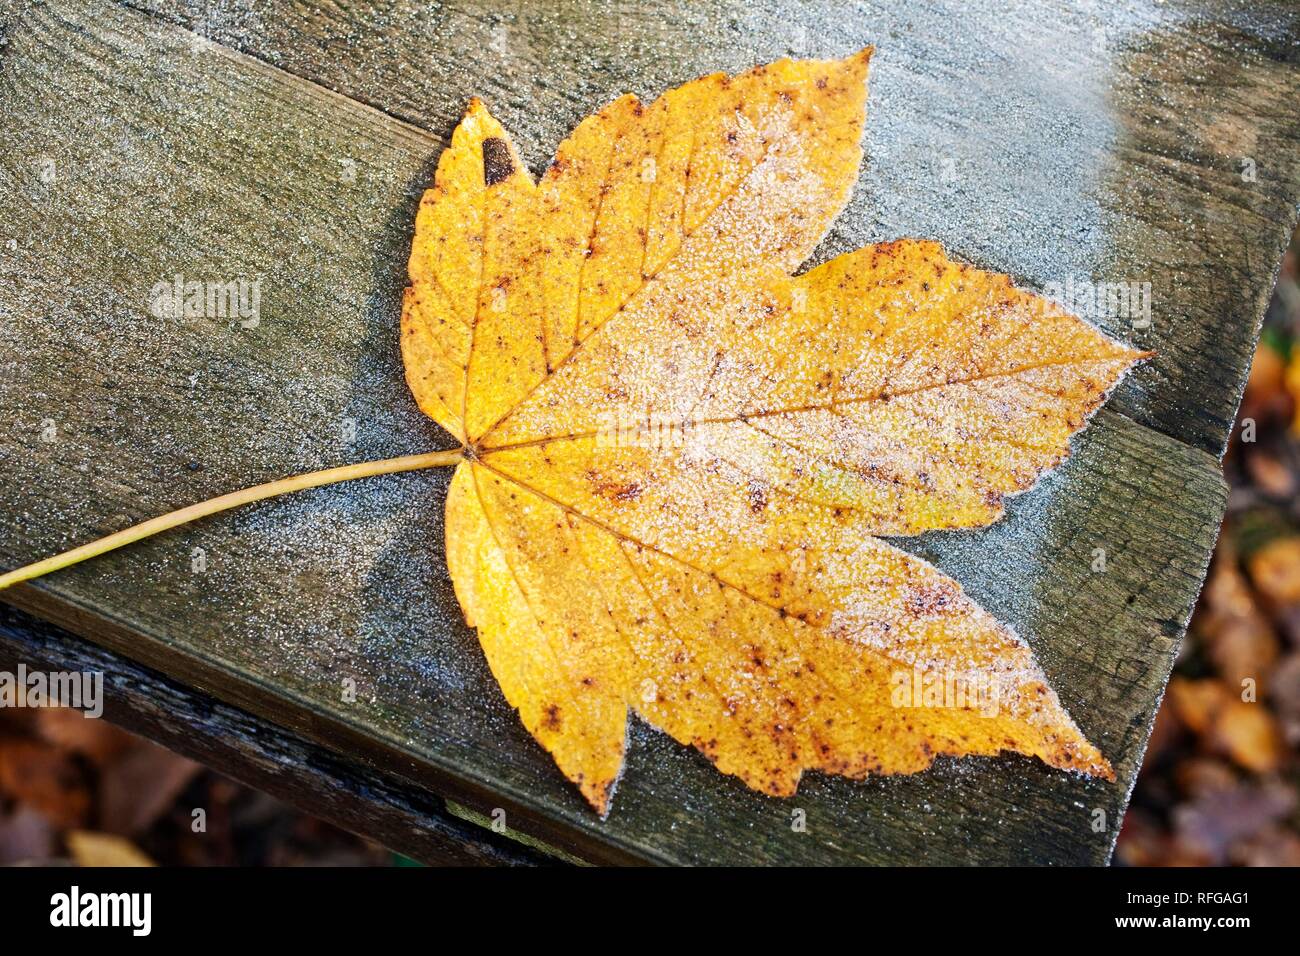 A leaf in autumn, Witten, Ruhr area, North Rhine-Westphalia, Germany Stock Photo